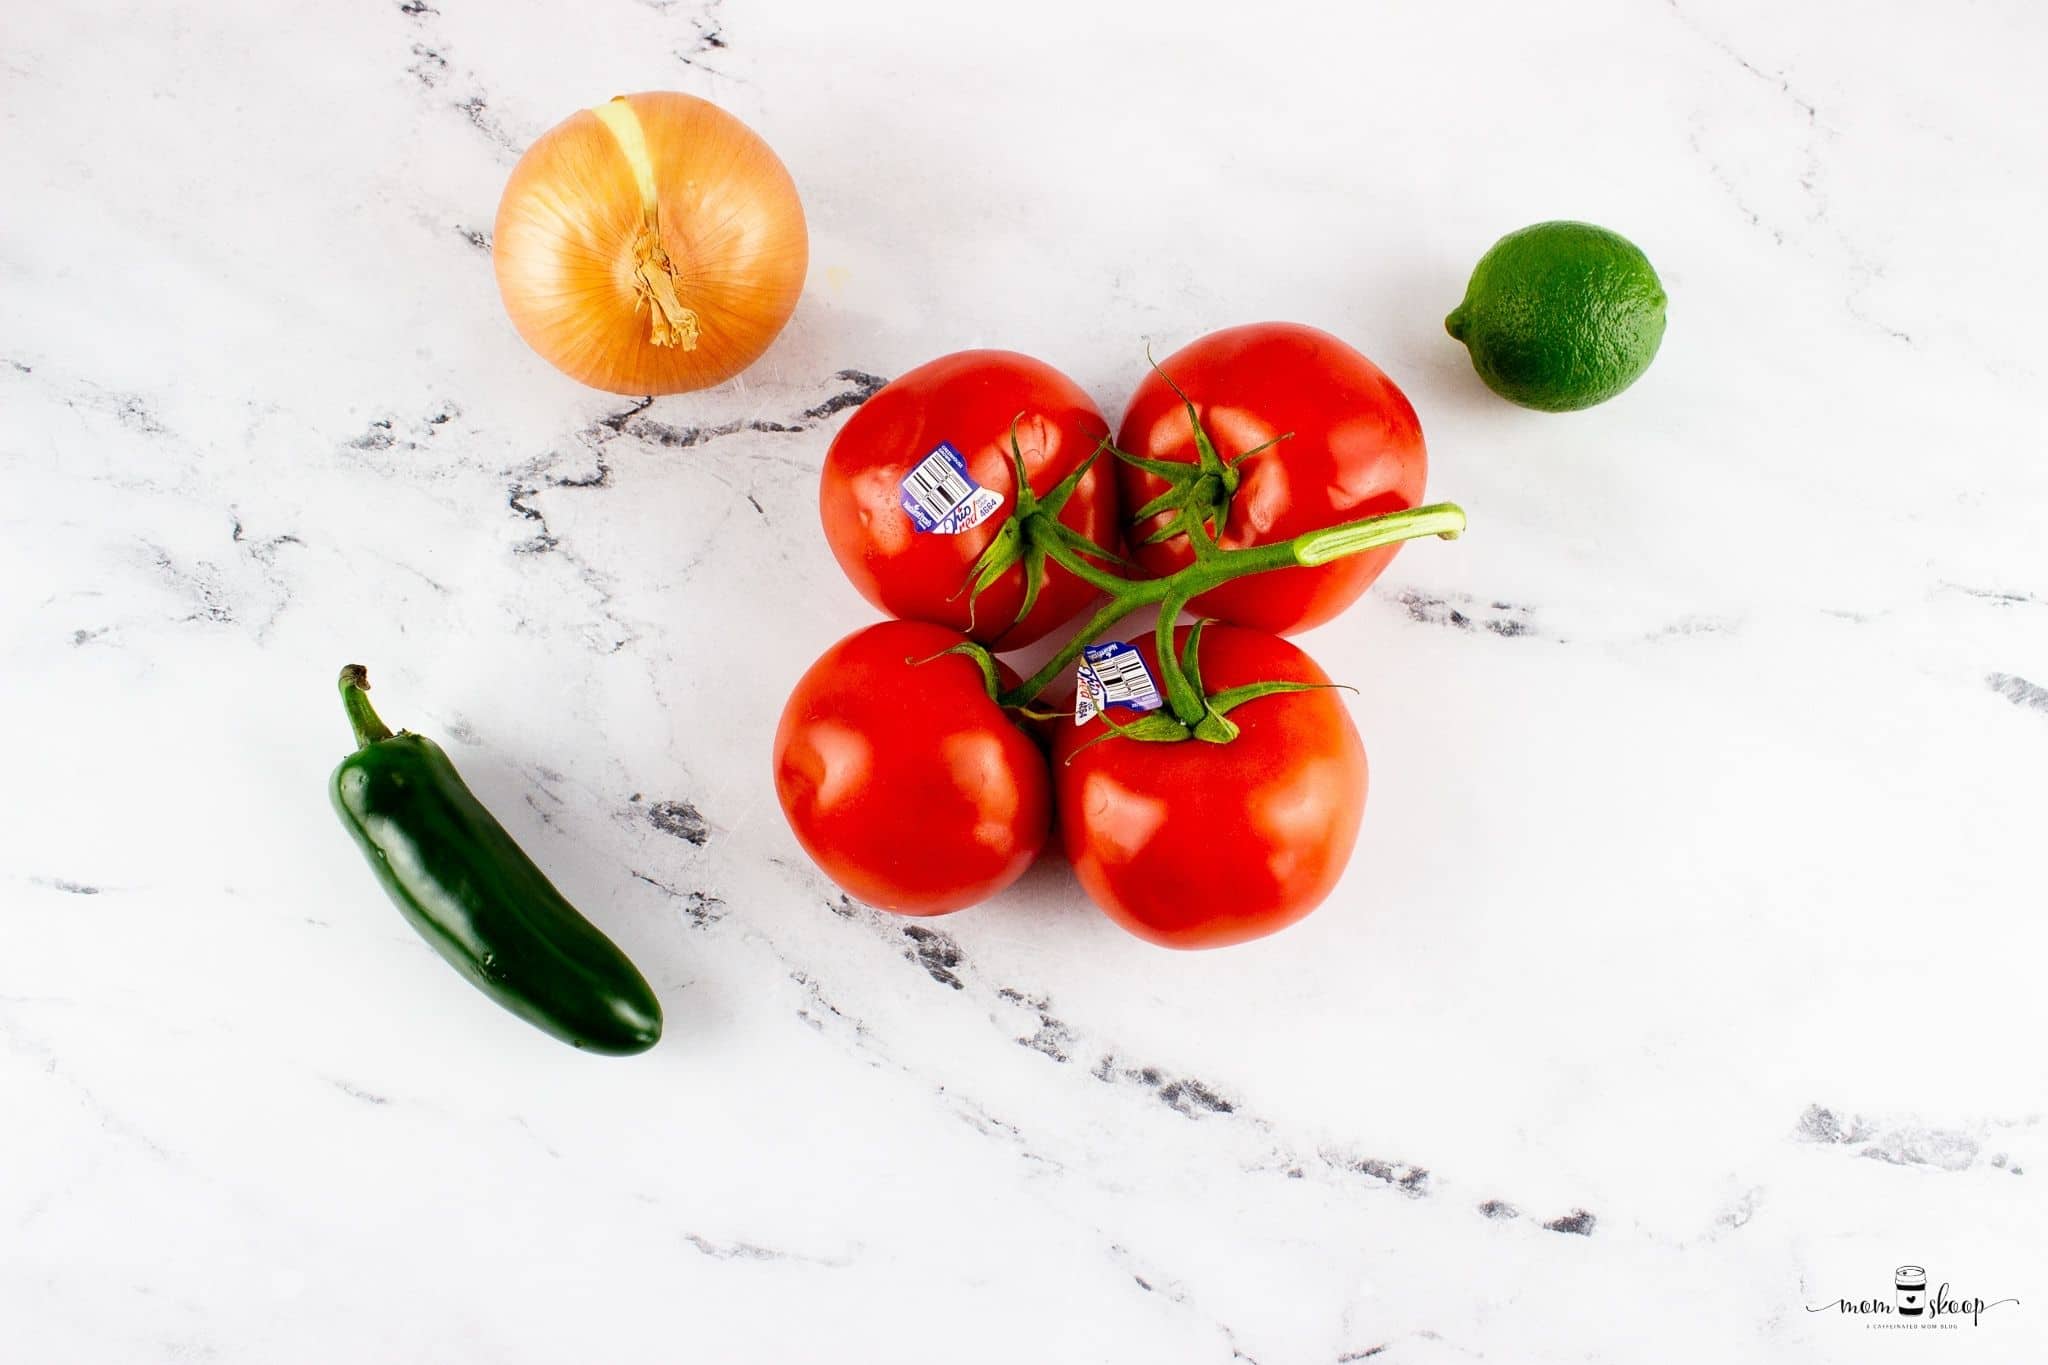 Ingredients needed to make fresh pico